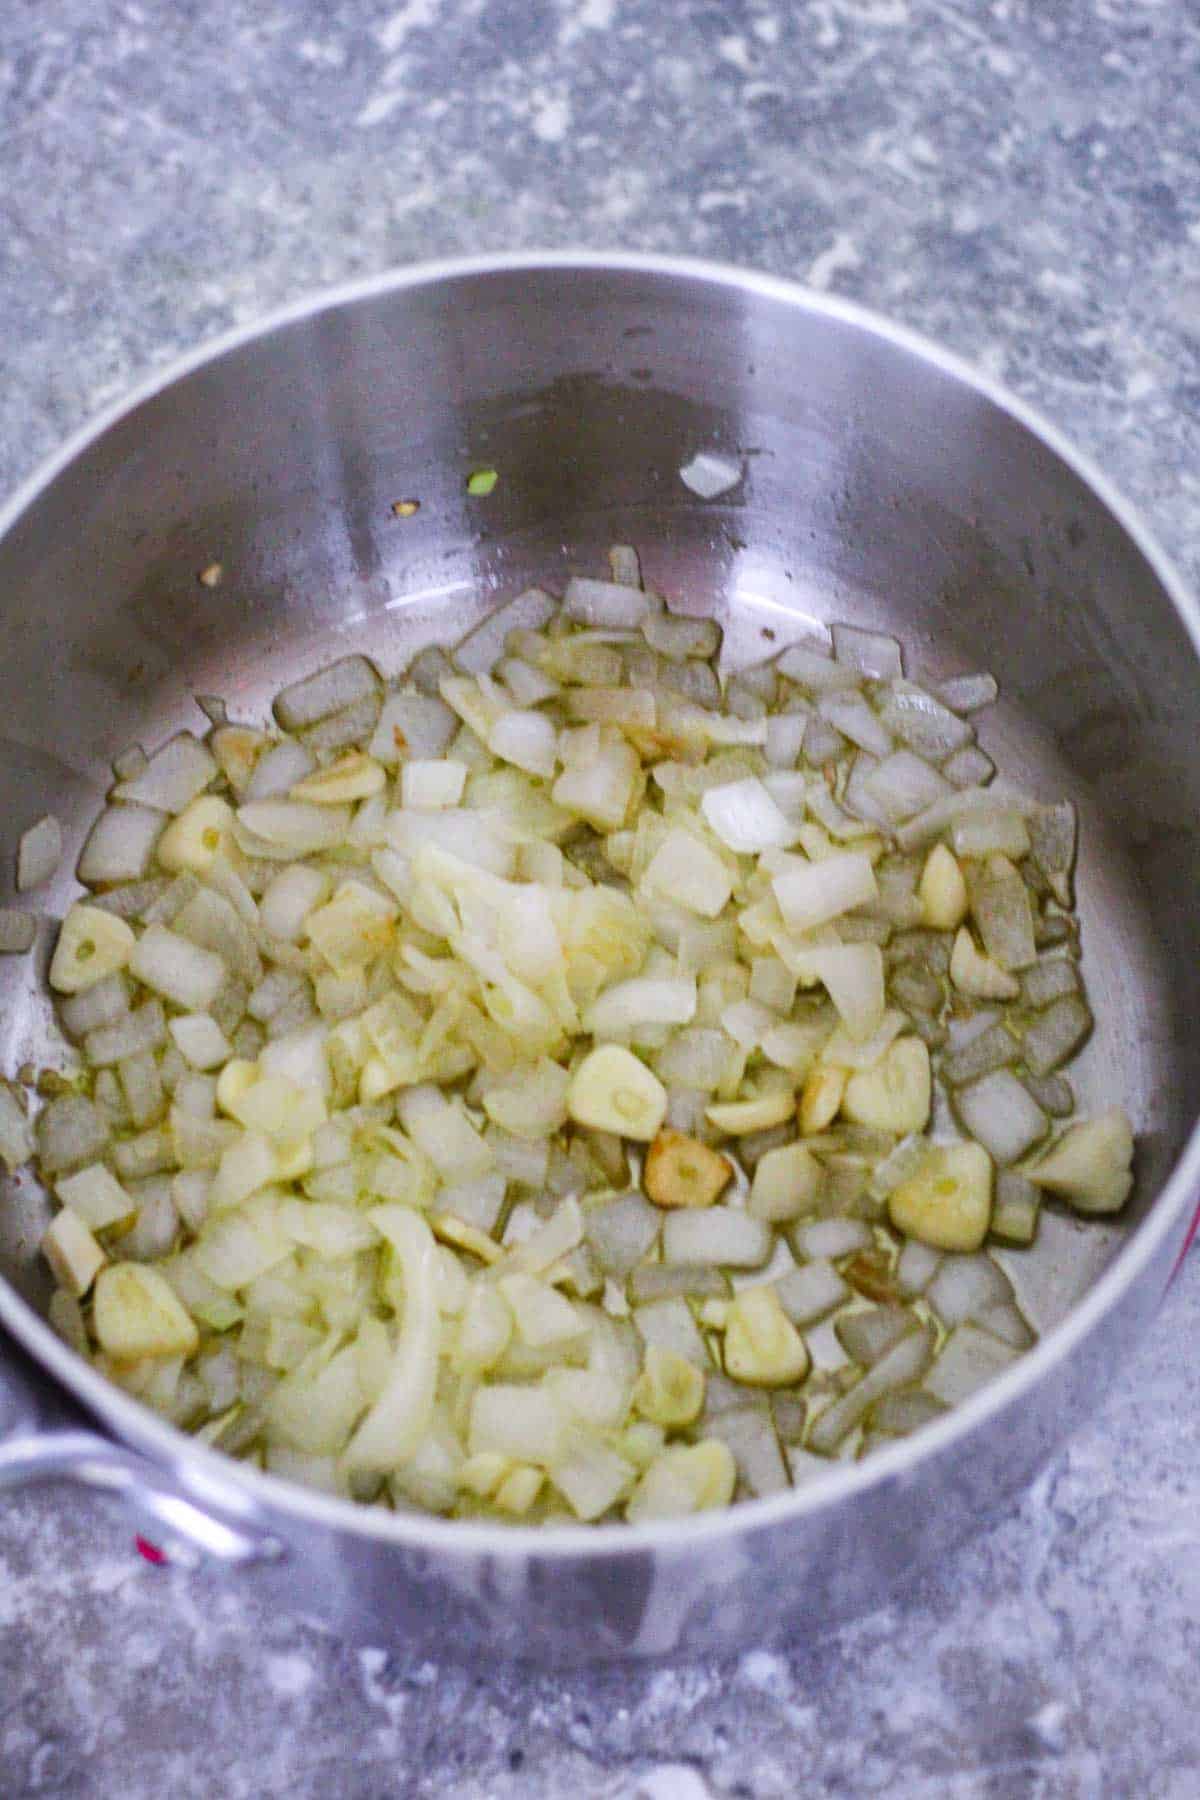 Sauteing onions and garlic. 